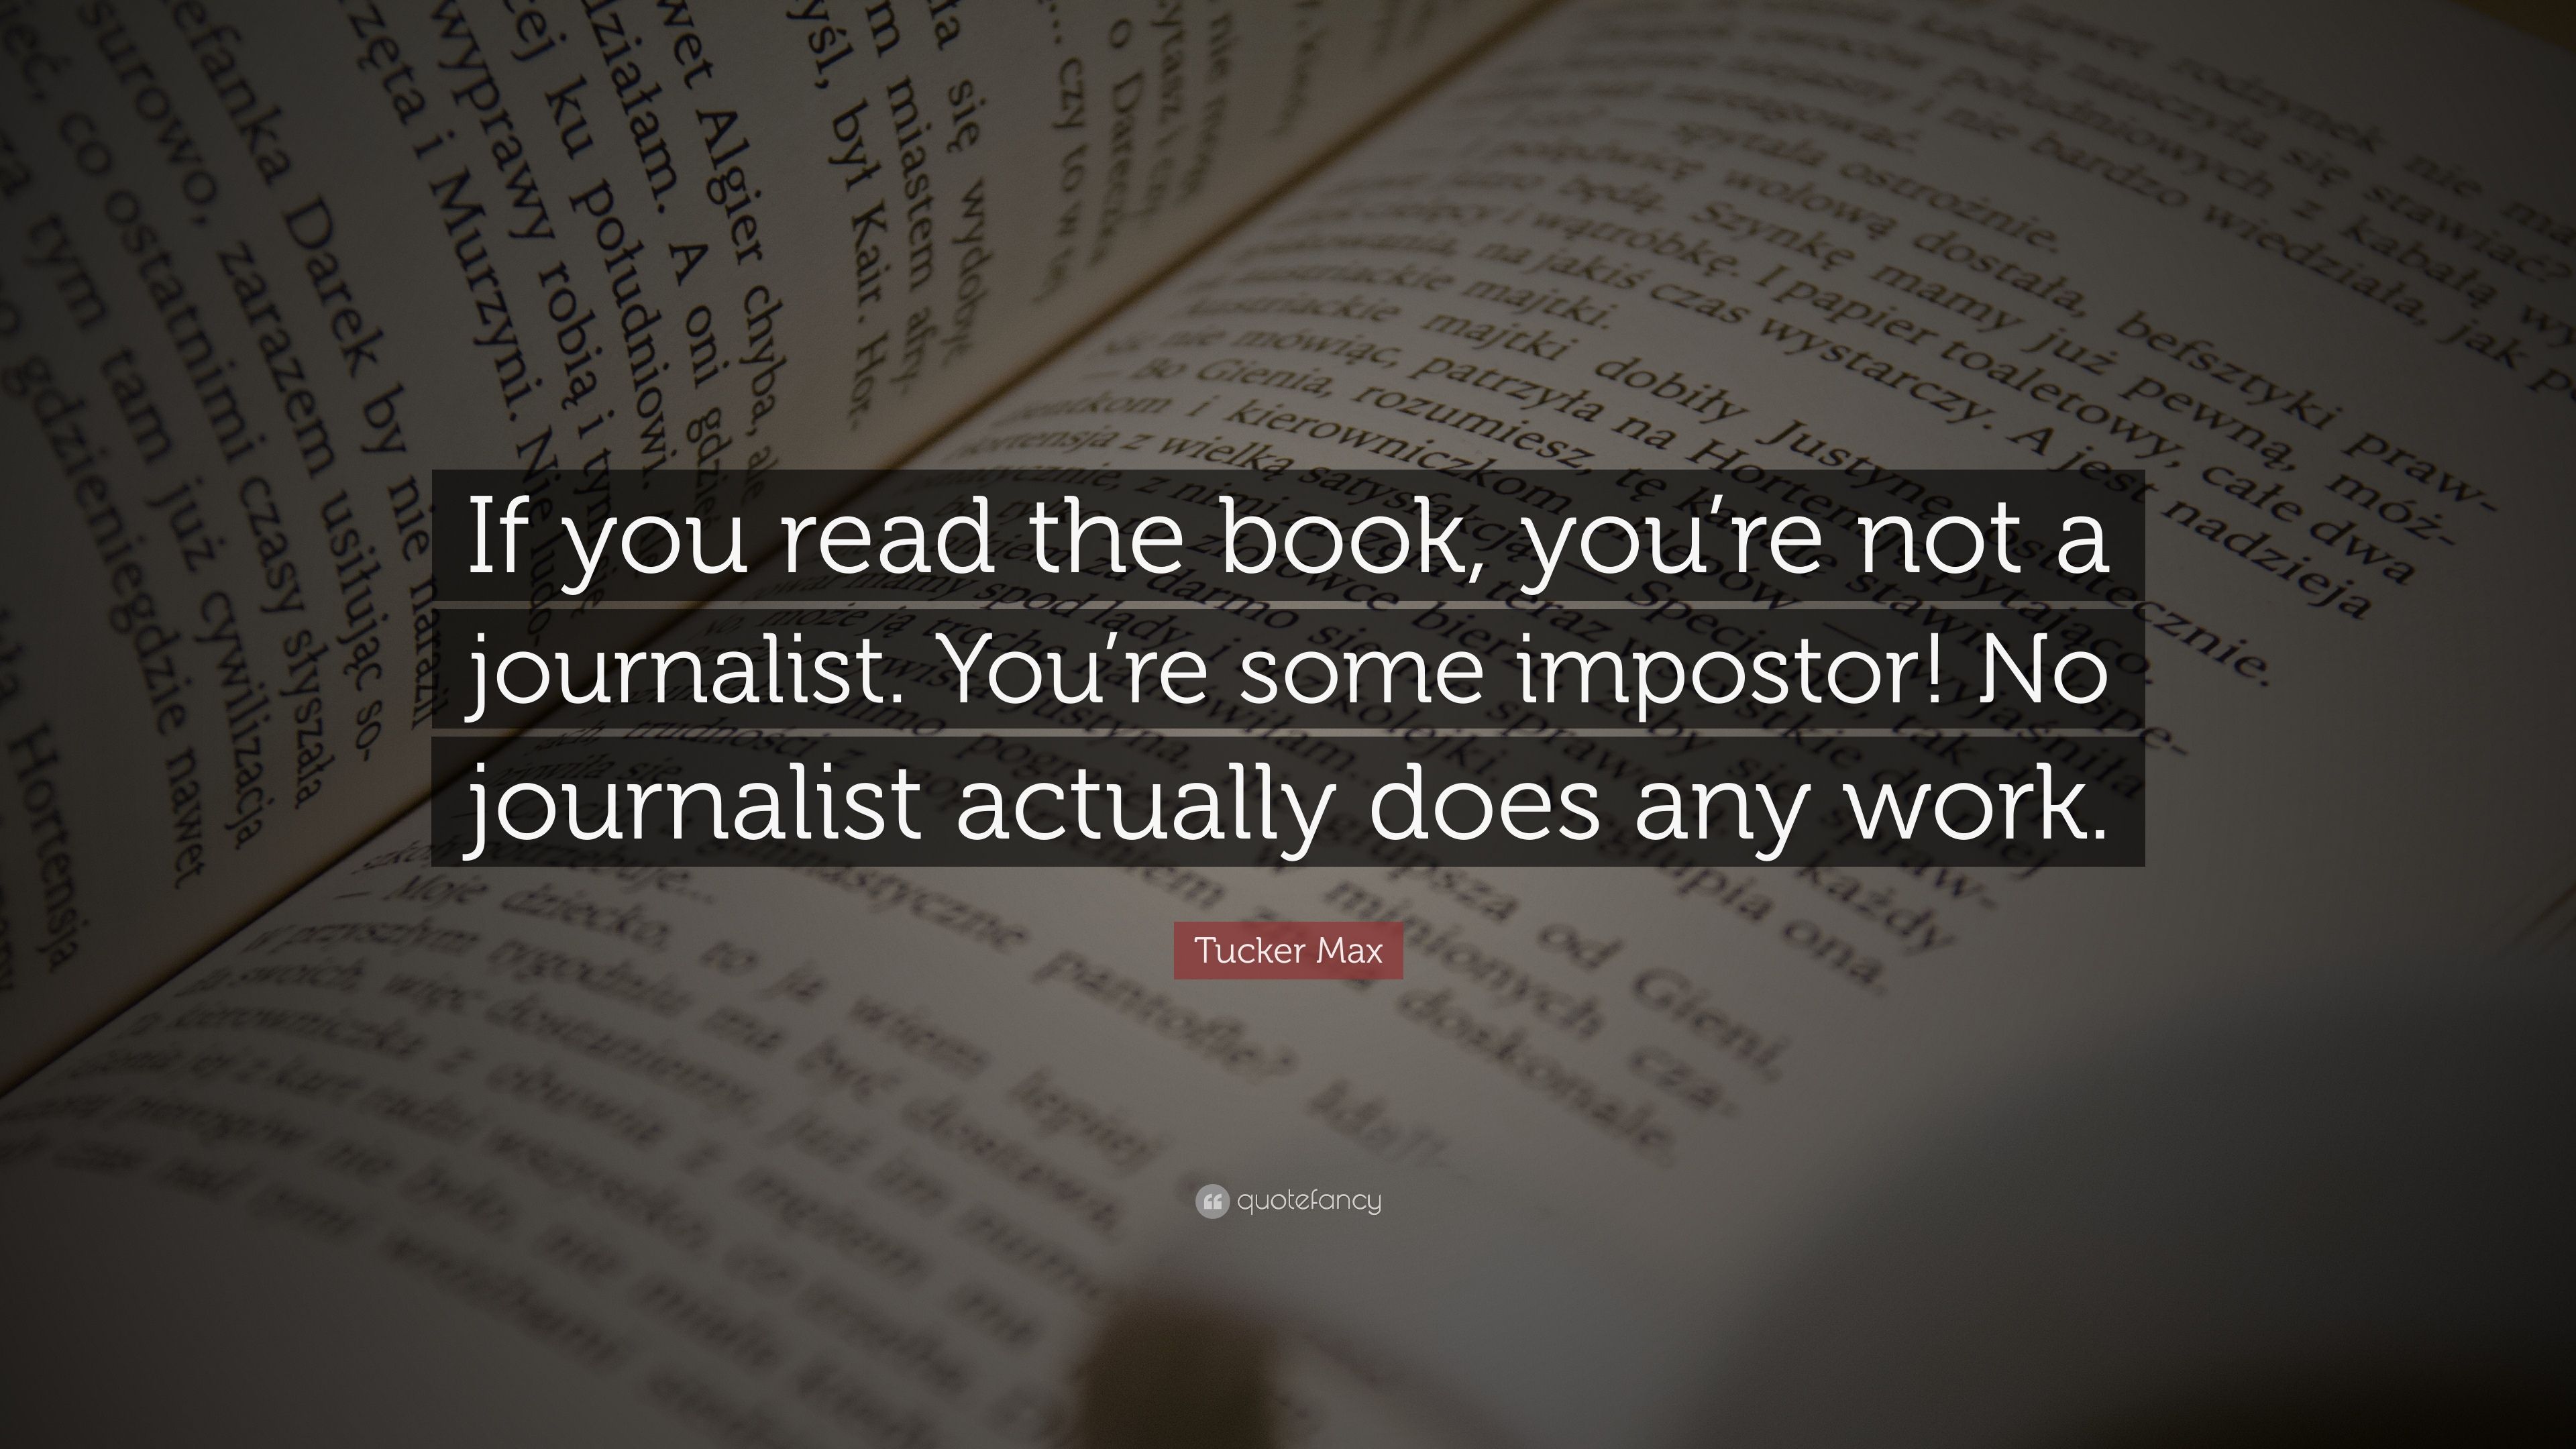 Tucker Max Quote: “If you read the book, you're not a journalist